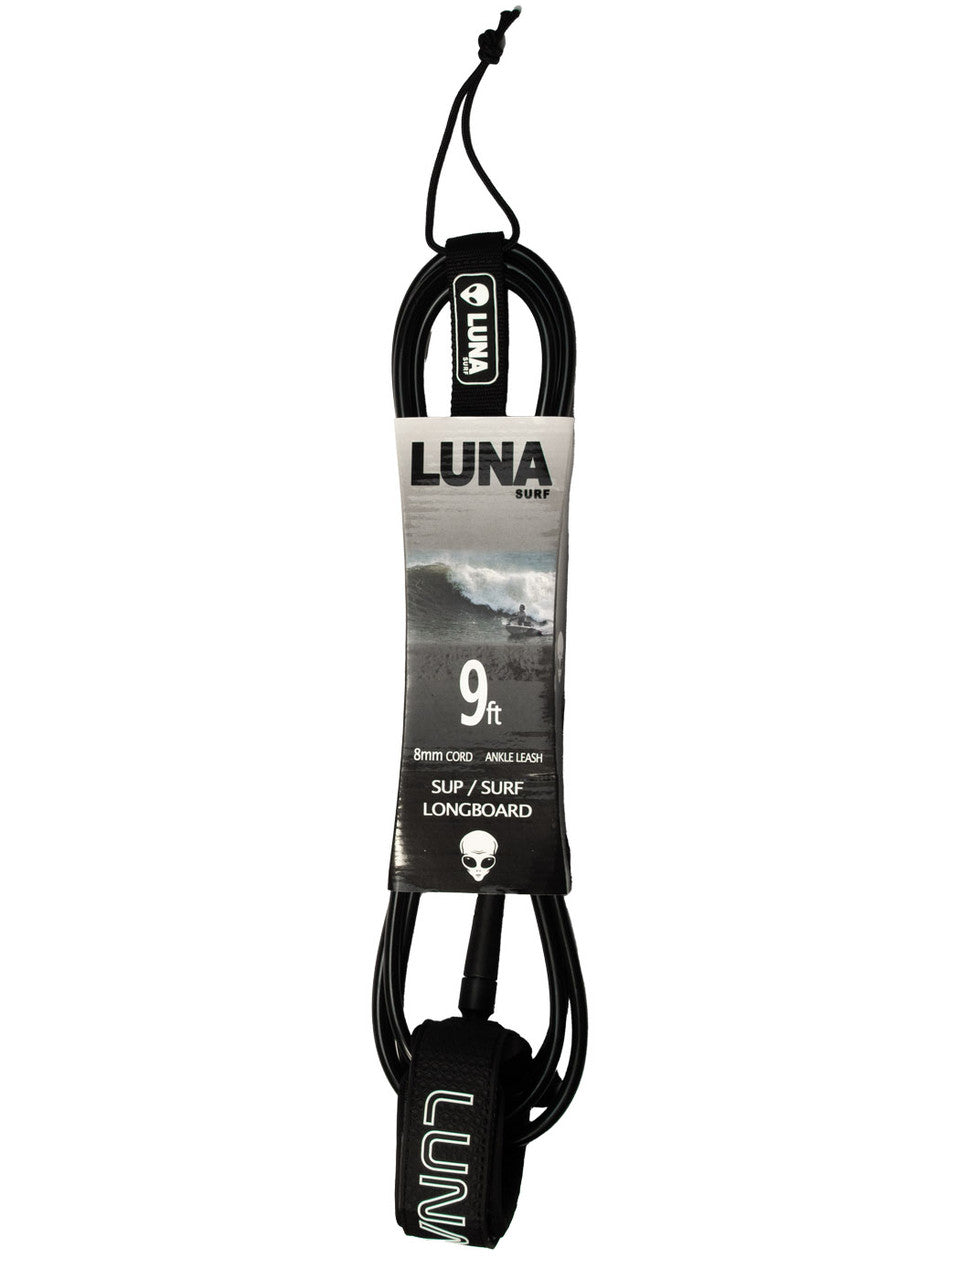 Black 9ft surf leash with 8mm cord. Lite weight, comfy slim cuff. Super strong velcro.